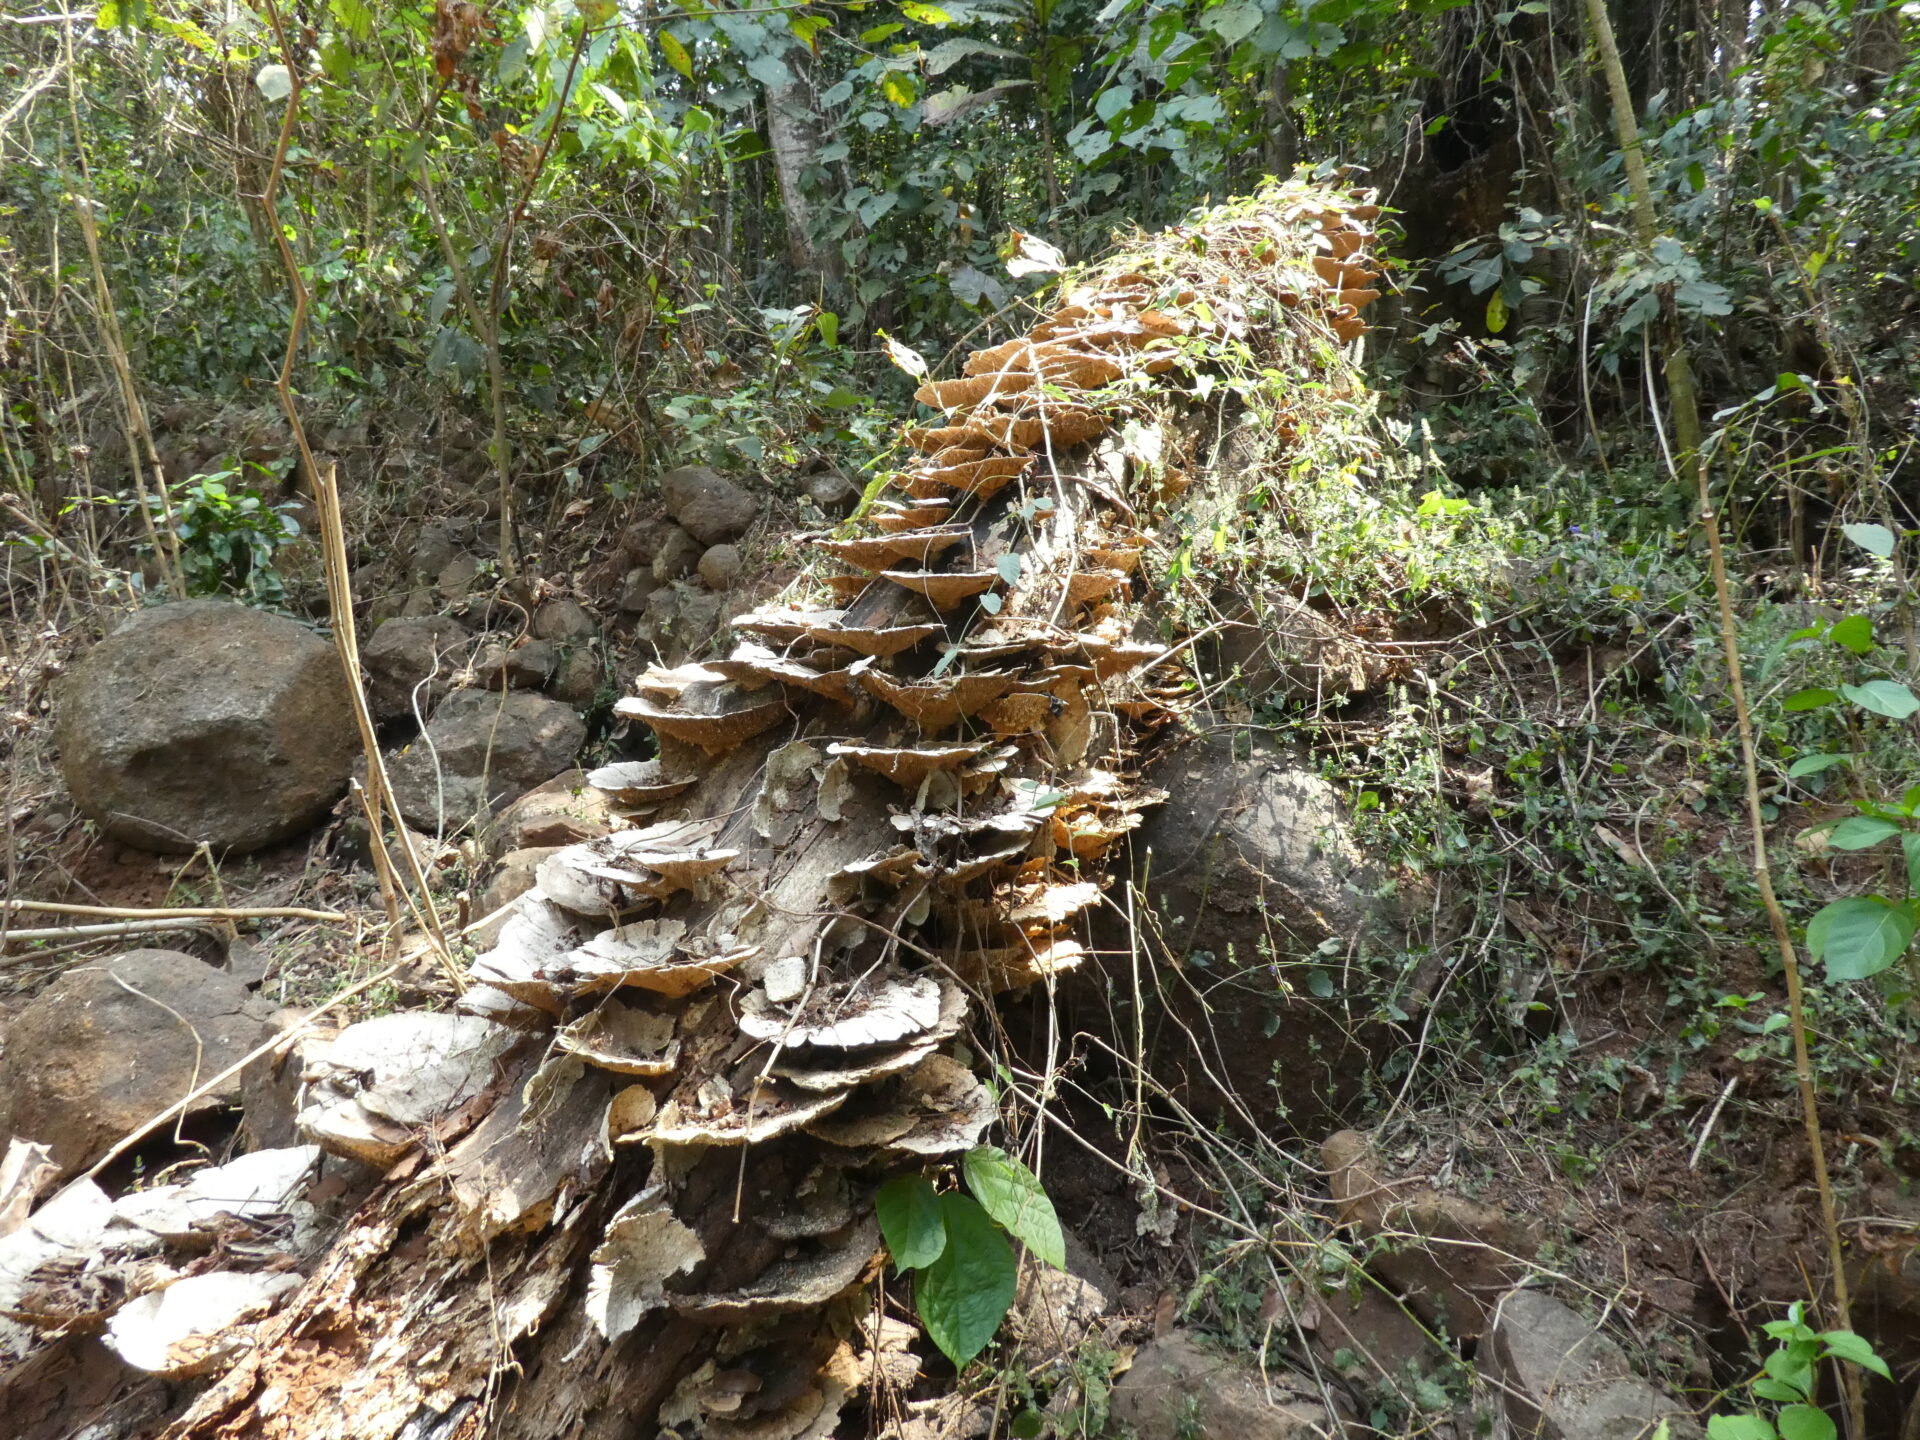 Many mushrooms sprout out from a fallen tree trunk.